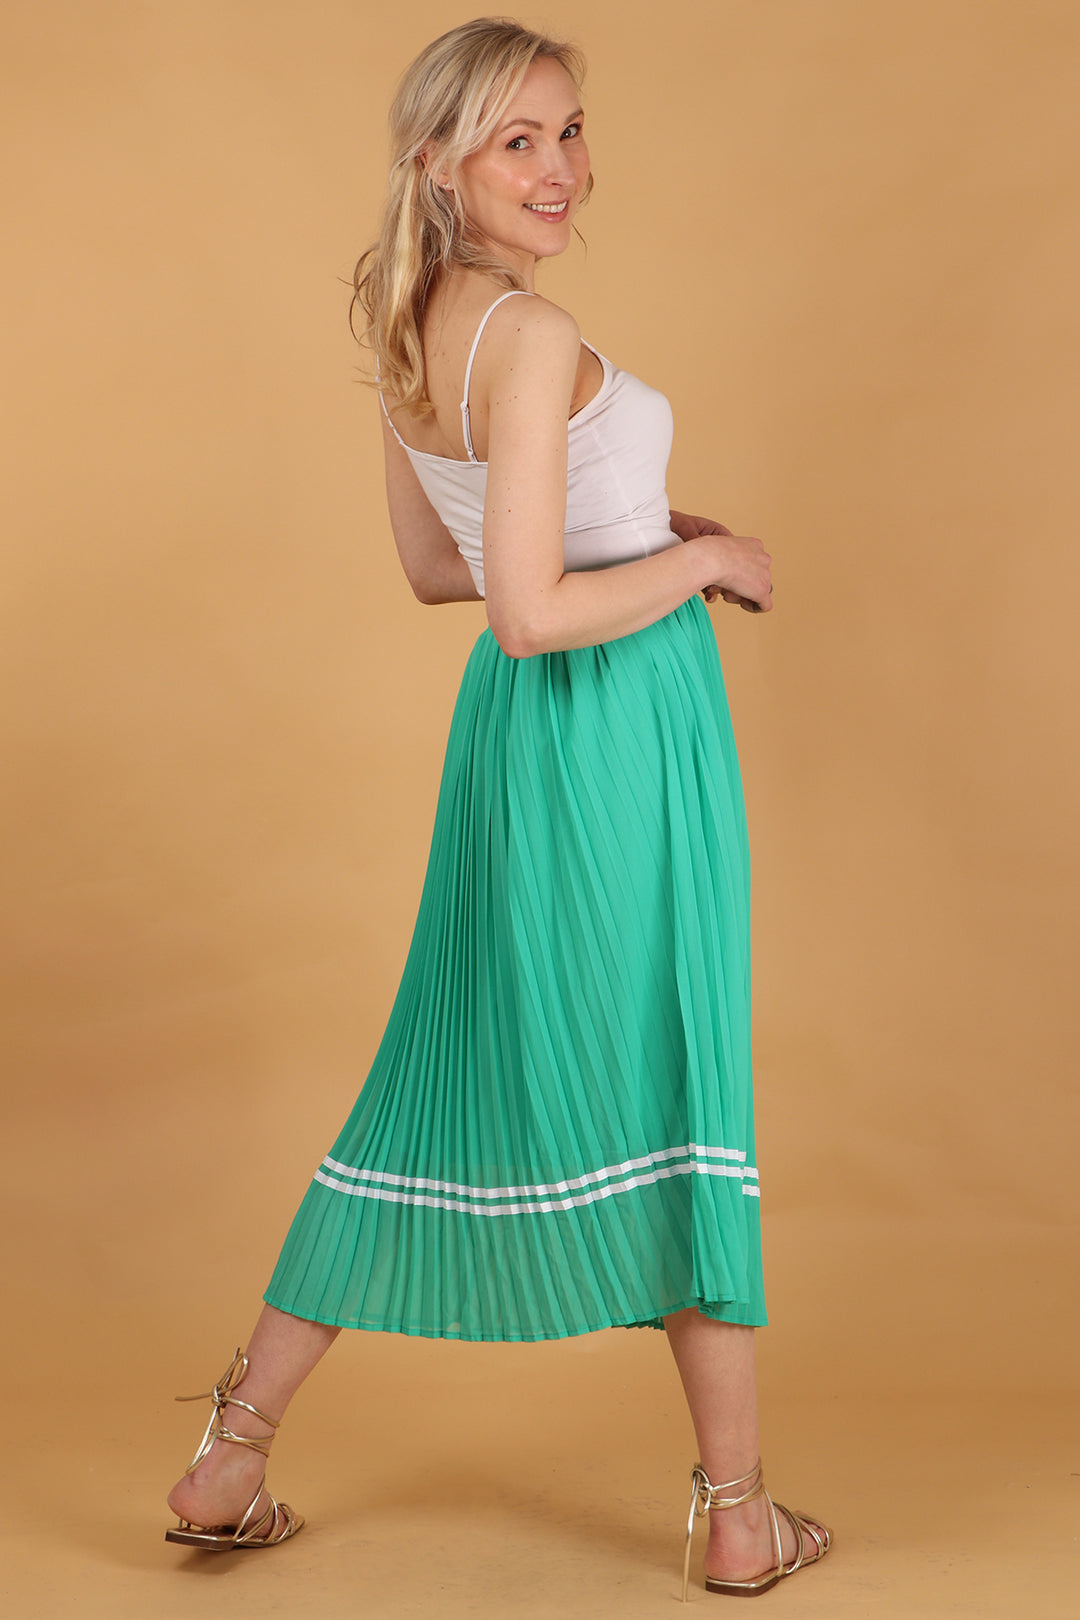 model showing the back of the green pleated skirt, showing the ribbon trim stripe is all around the skirt